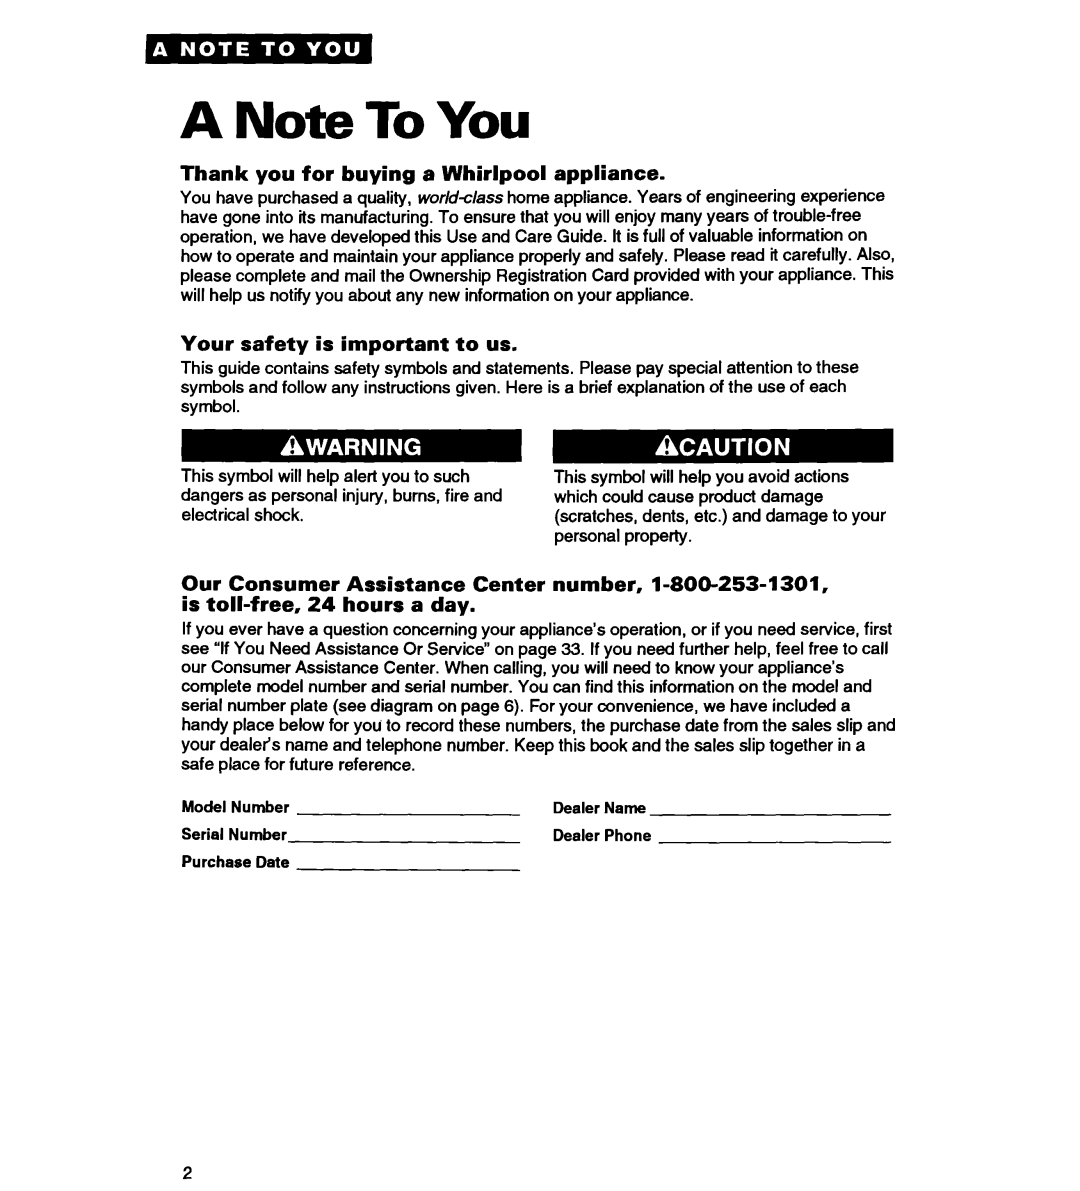 Whirlpool RS363PXY manual A Note To You, Thank you for buying a Whirlpool appliance, Your safety is important to us 